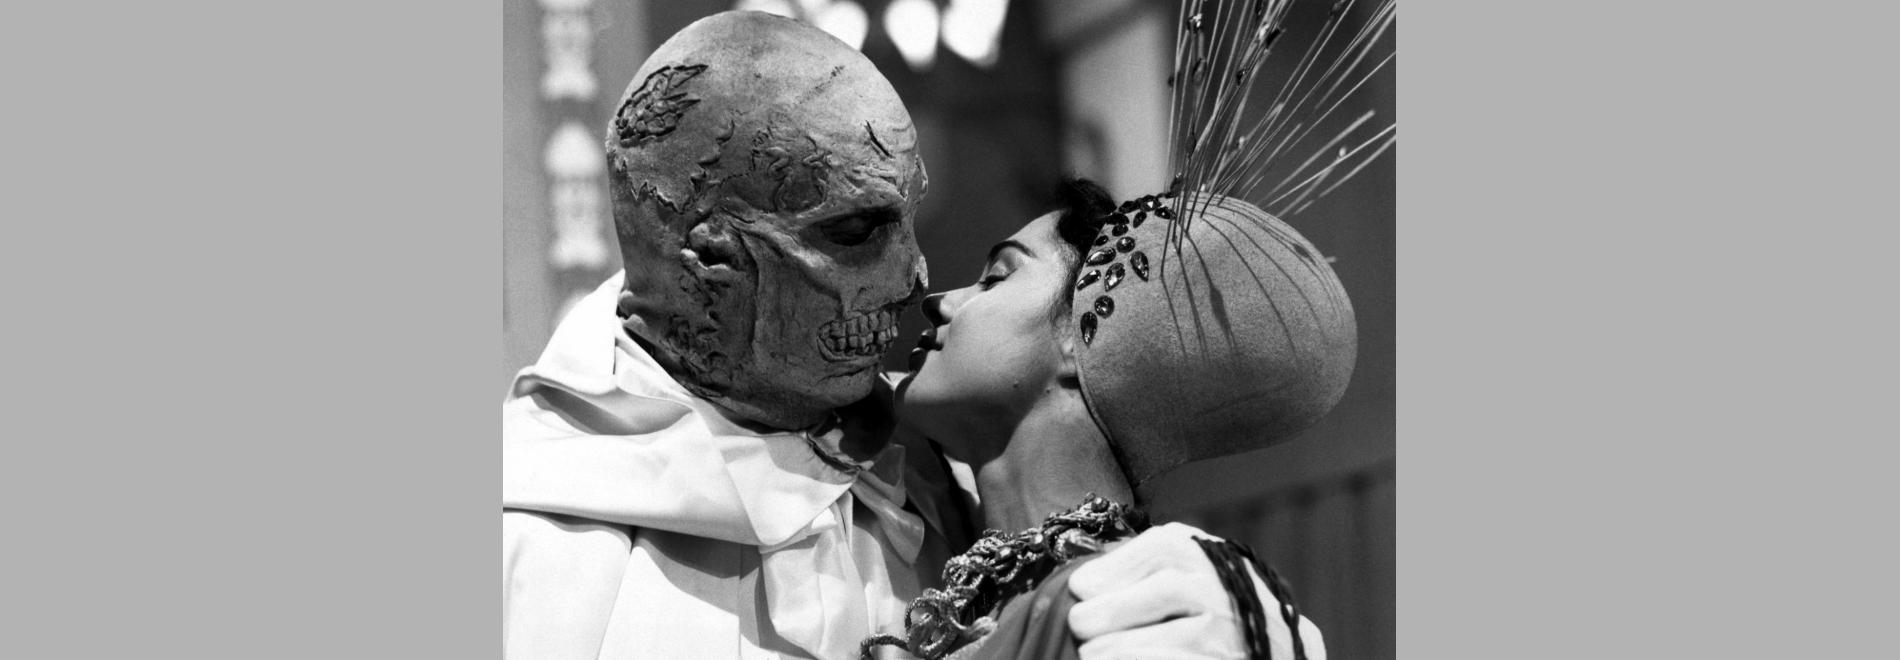 The Abominable Dr. Phibes (Robert Fuest, 1971)